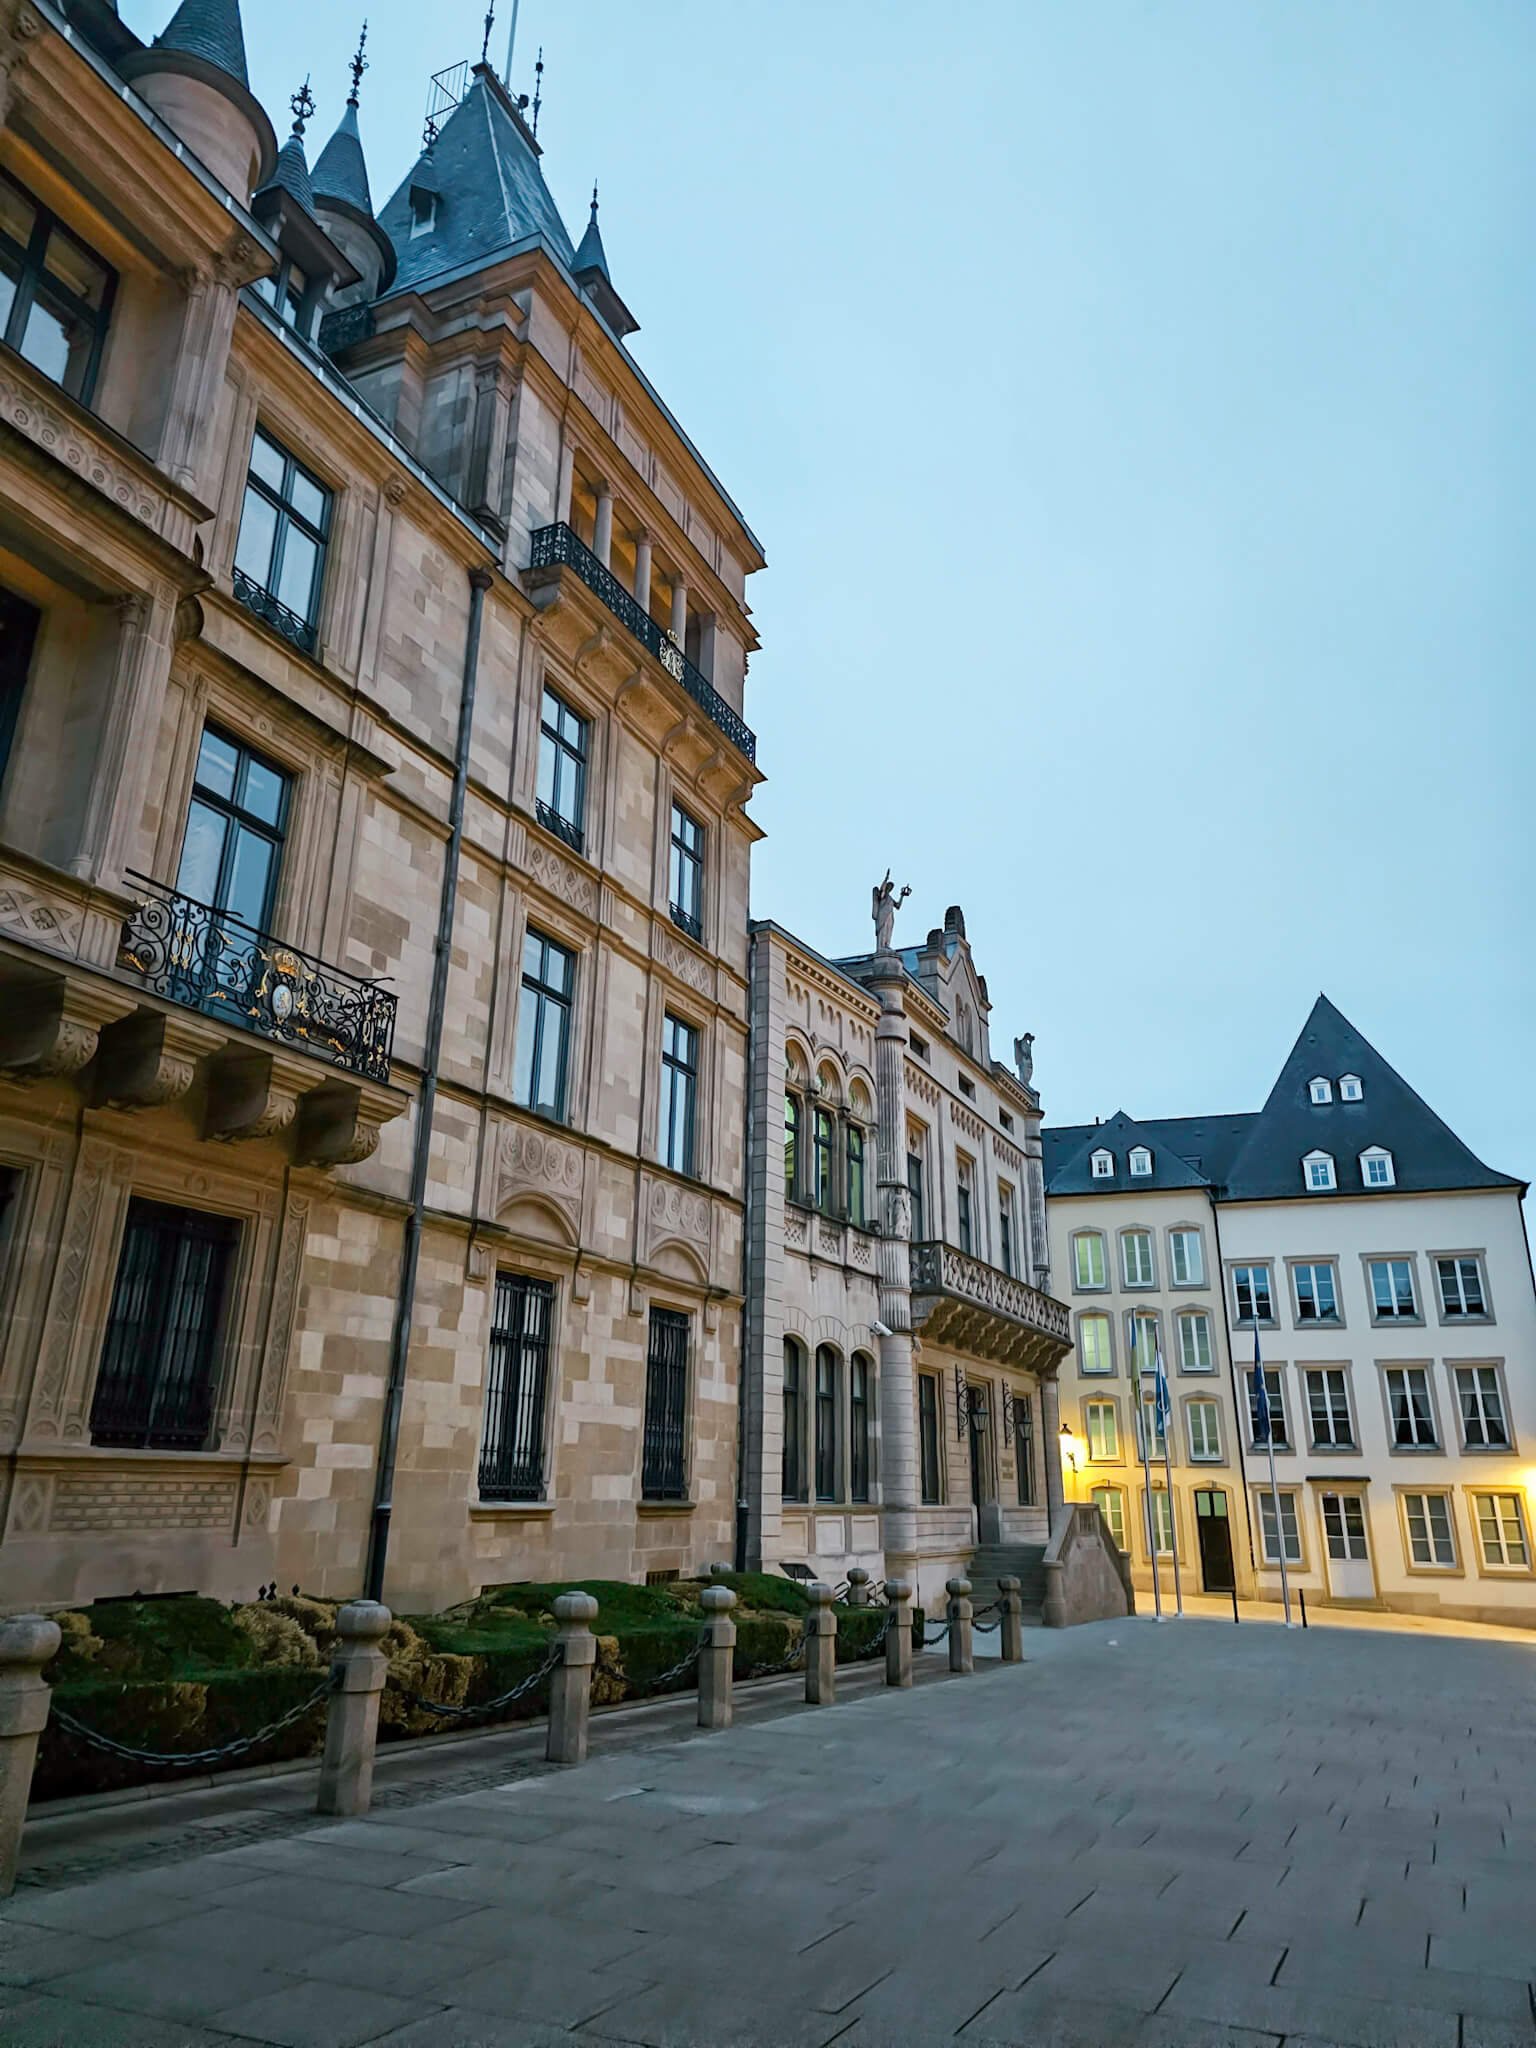 a guide for Visiting Luxembourg city